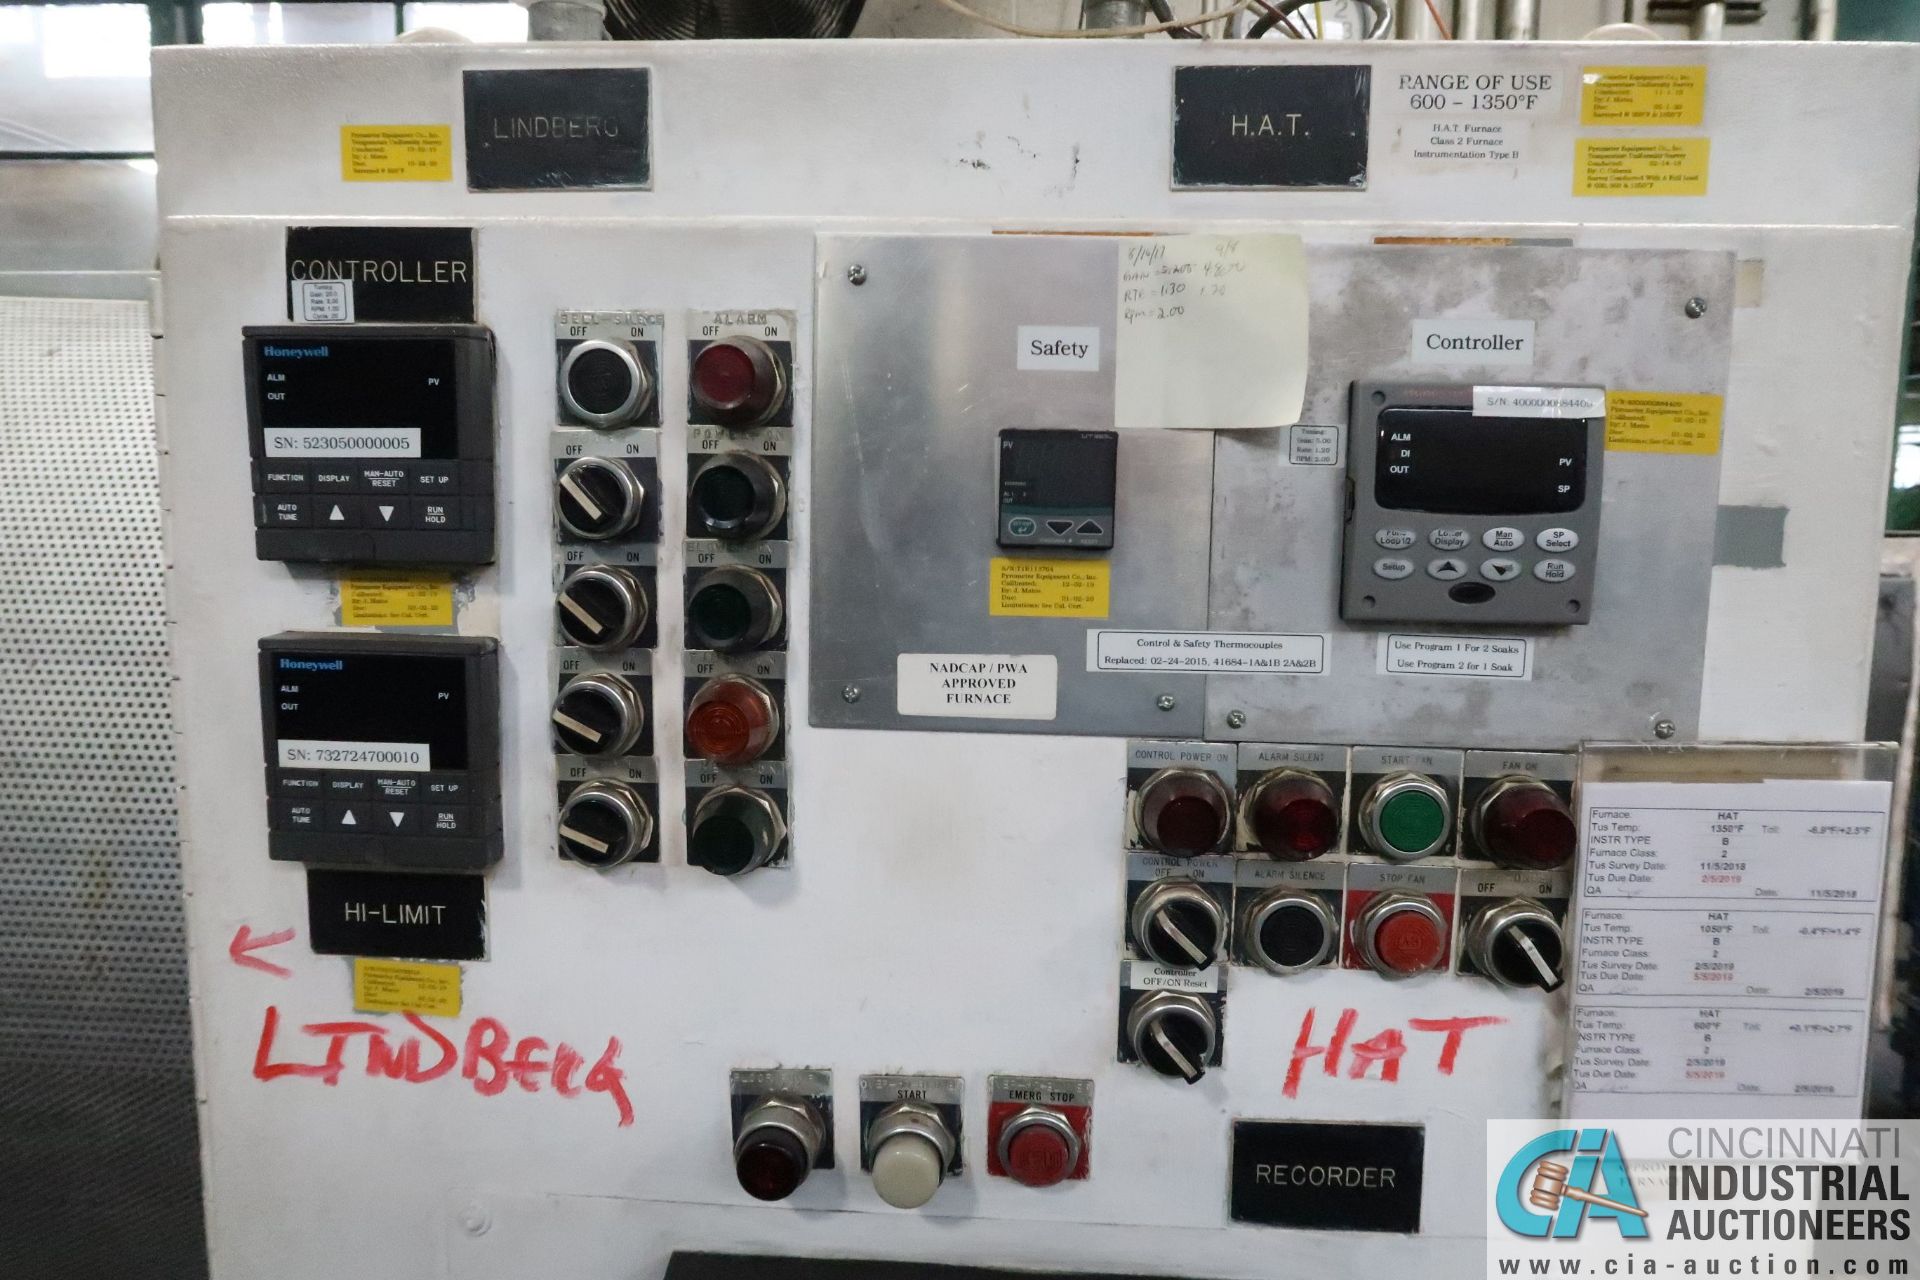 HONEYWELL CONTROL CABINET - Loading fee due the “ERRA” Pedowitz Machinery Movers $50.00 - Image 2 of 4